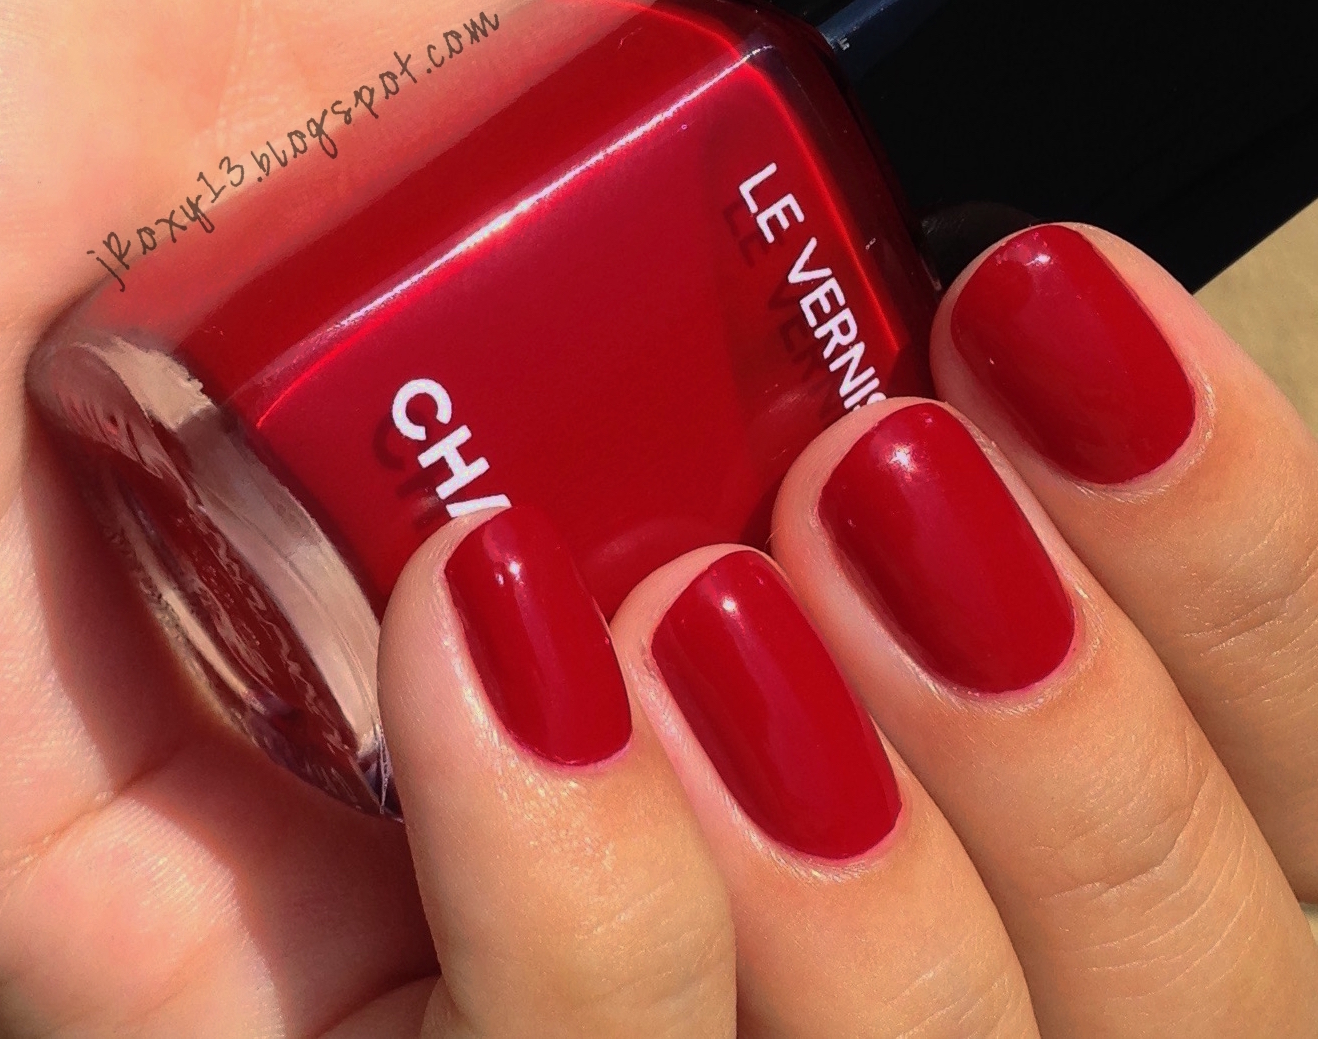 Chanel Le Vernis Longwear Nail Colour in Pirate - wide 5